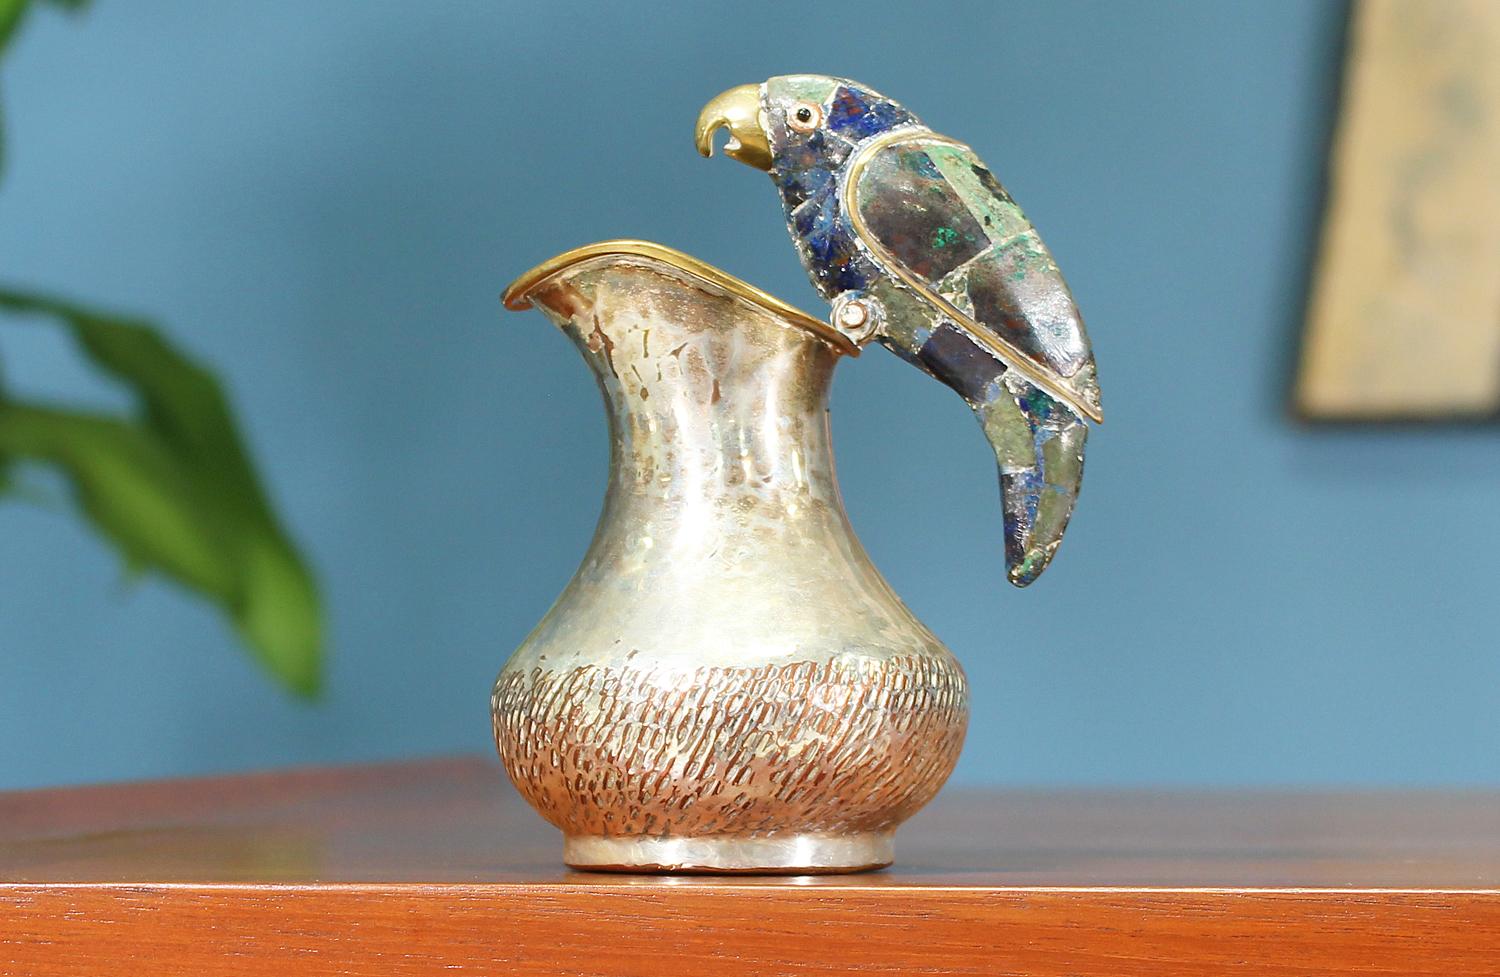 Small silver pitcher designed and manufactured by Los Castillo in Mexico circa 1950’s. Crafted in silver, the pitcher shows a beautiful texture and warm patina throughout. The decorative parrot is set with abalone shells giving it a playful sheen.